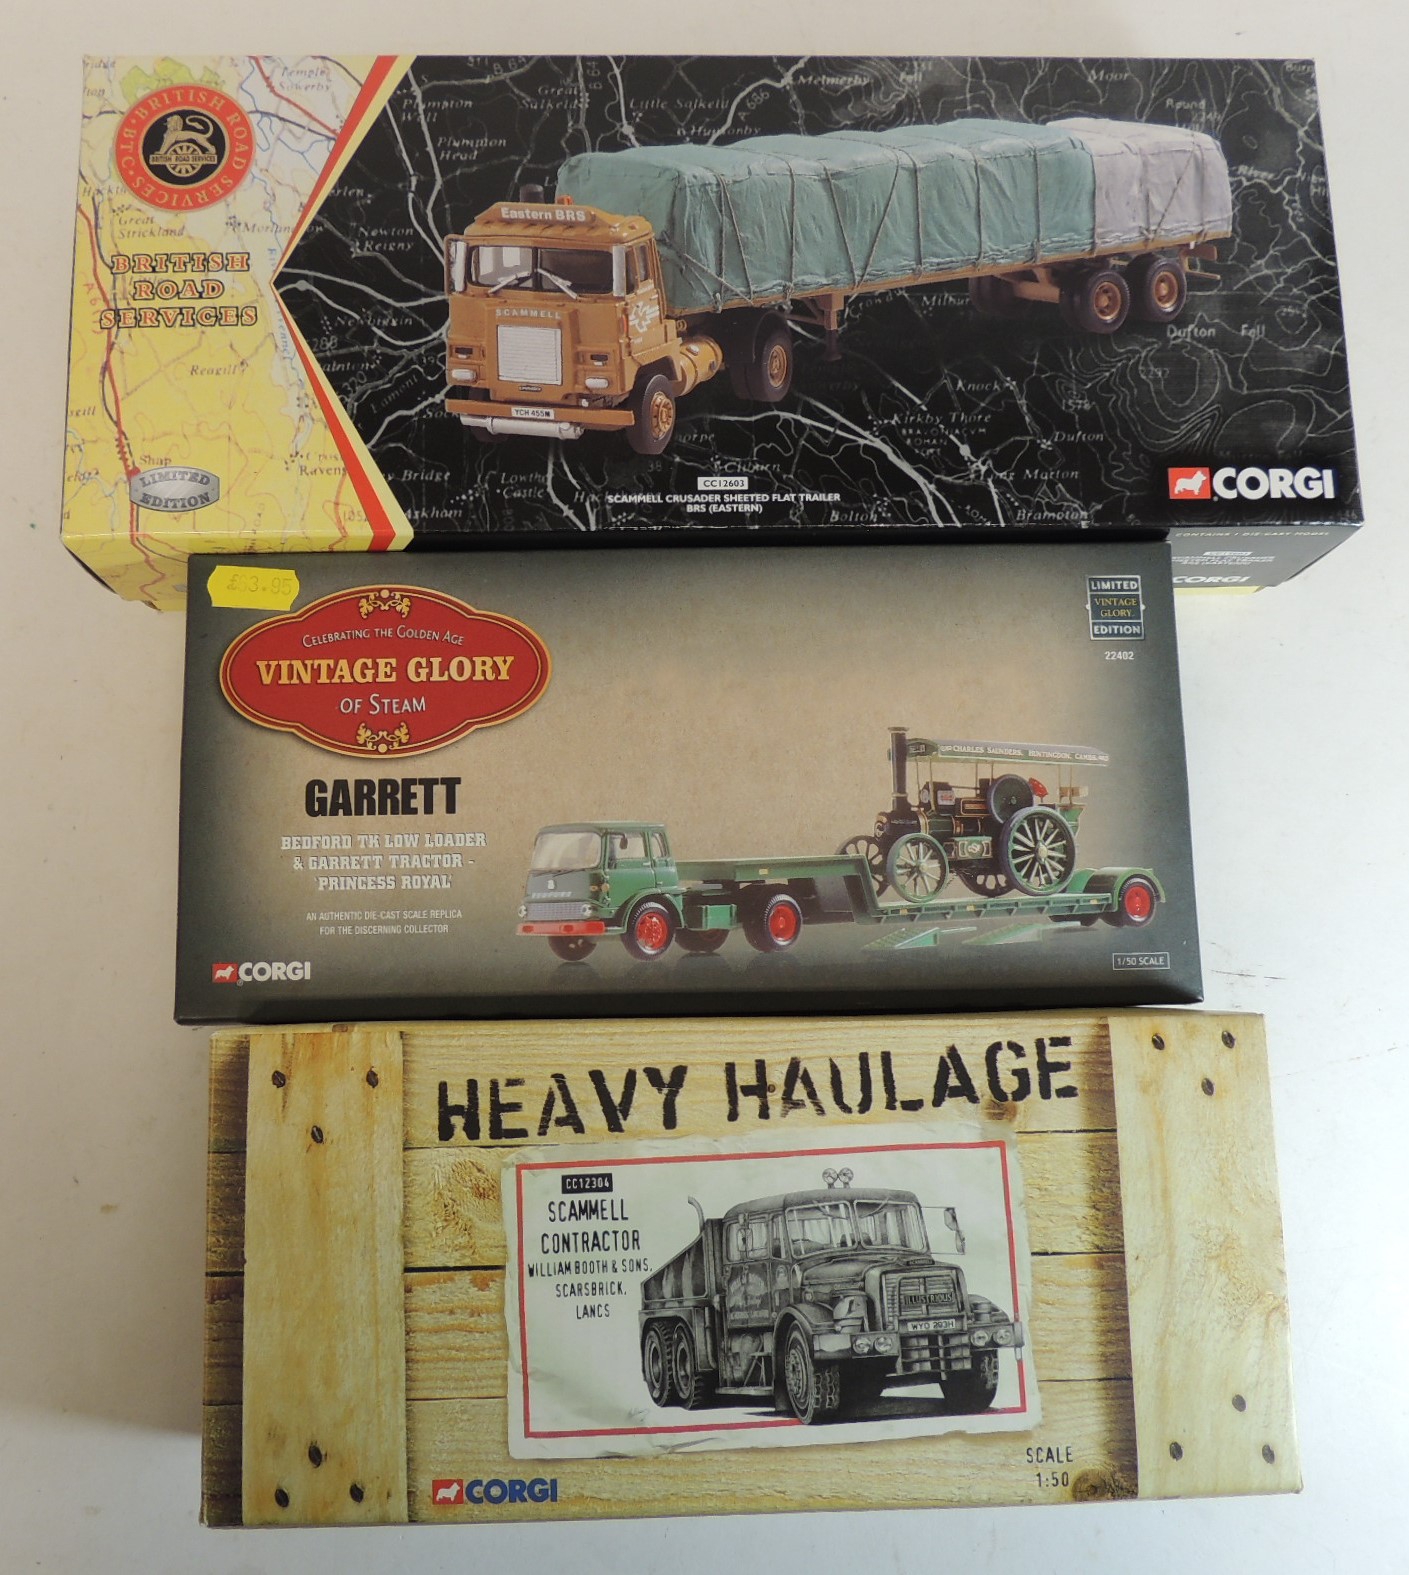 CORGI - Limited Edition CC12304 Scammell Contractor William Booth and Sons, boxed; limited edtn.